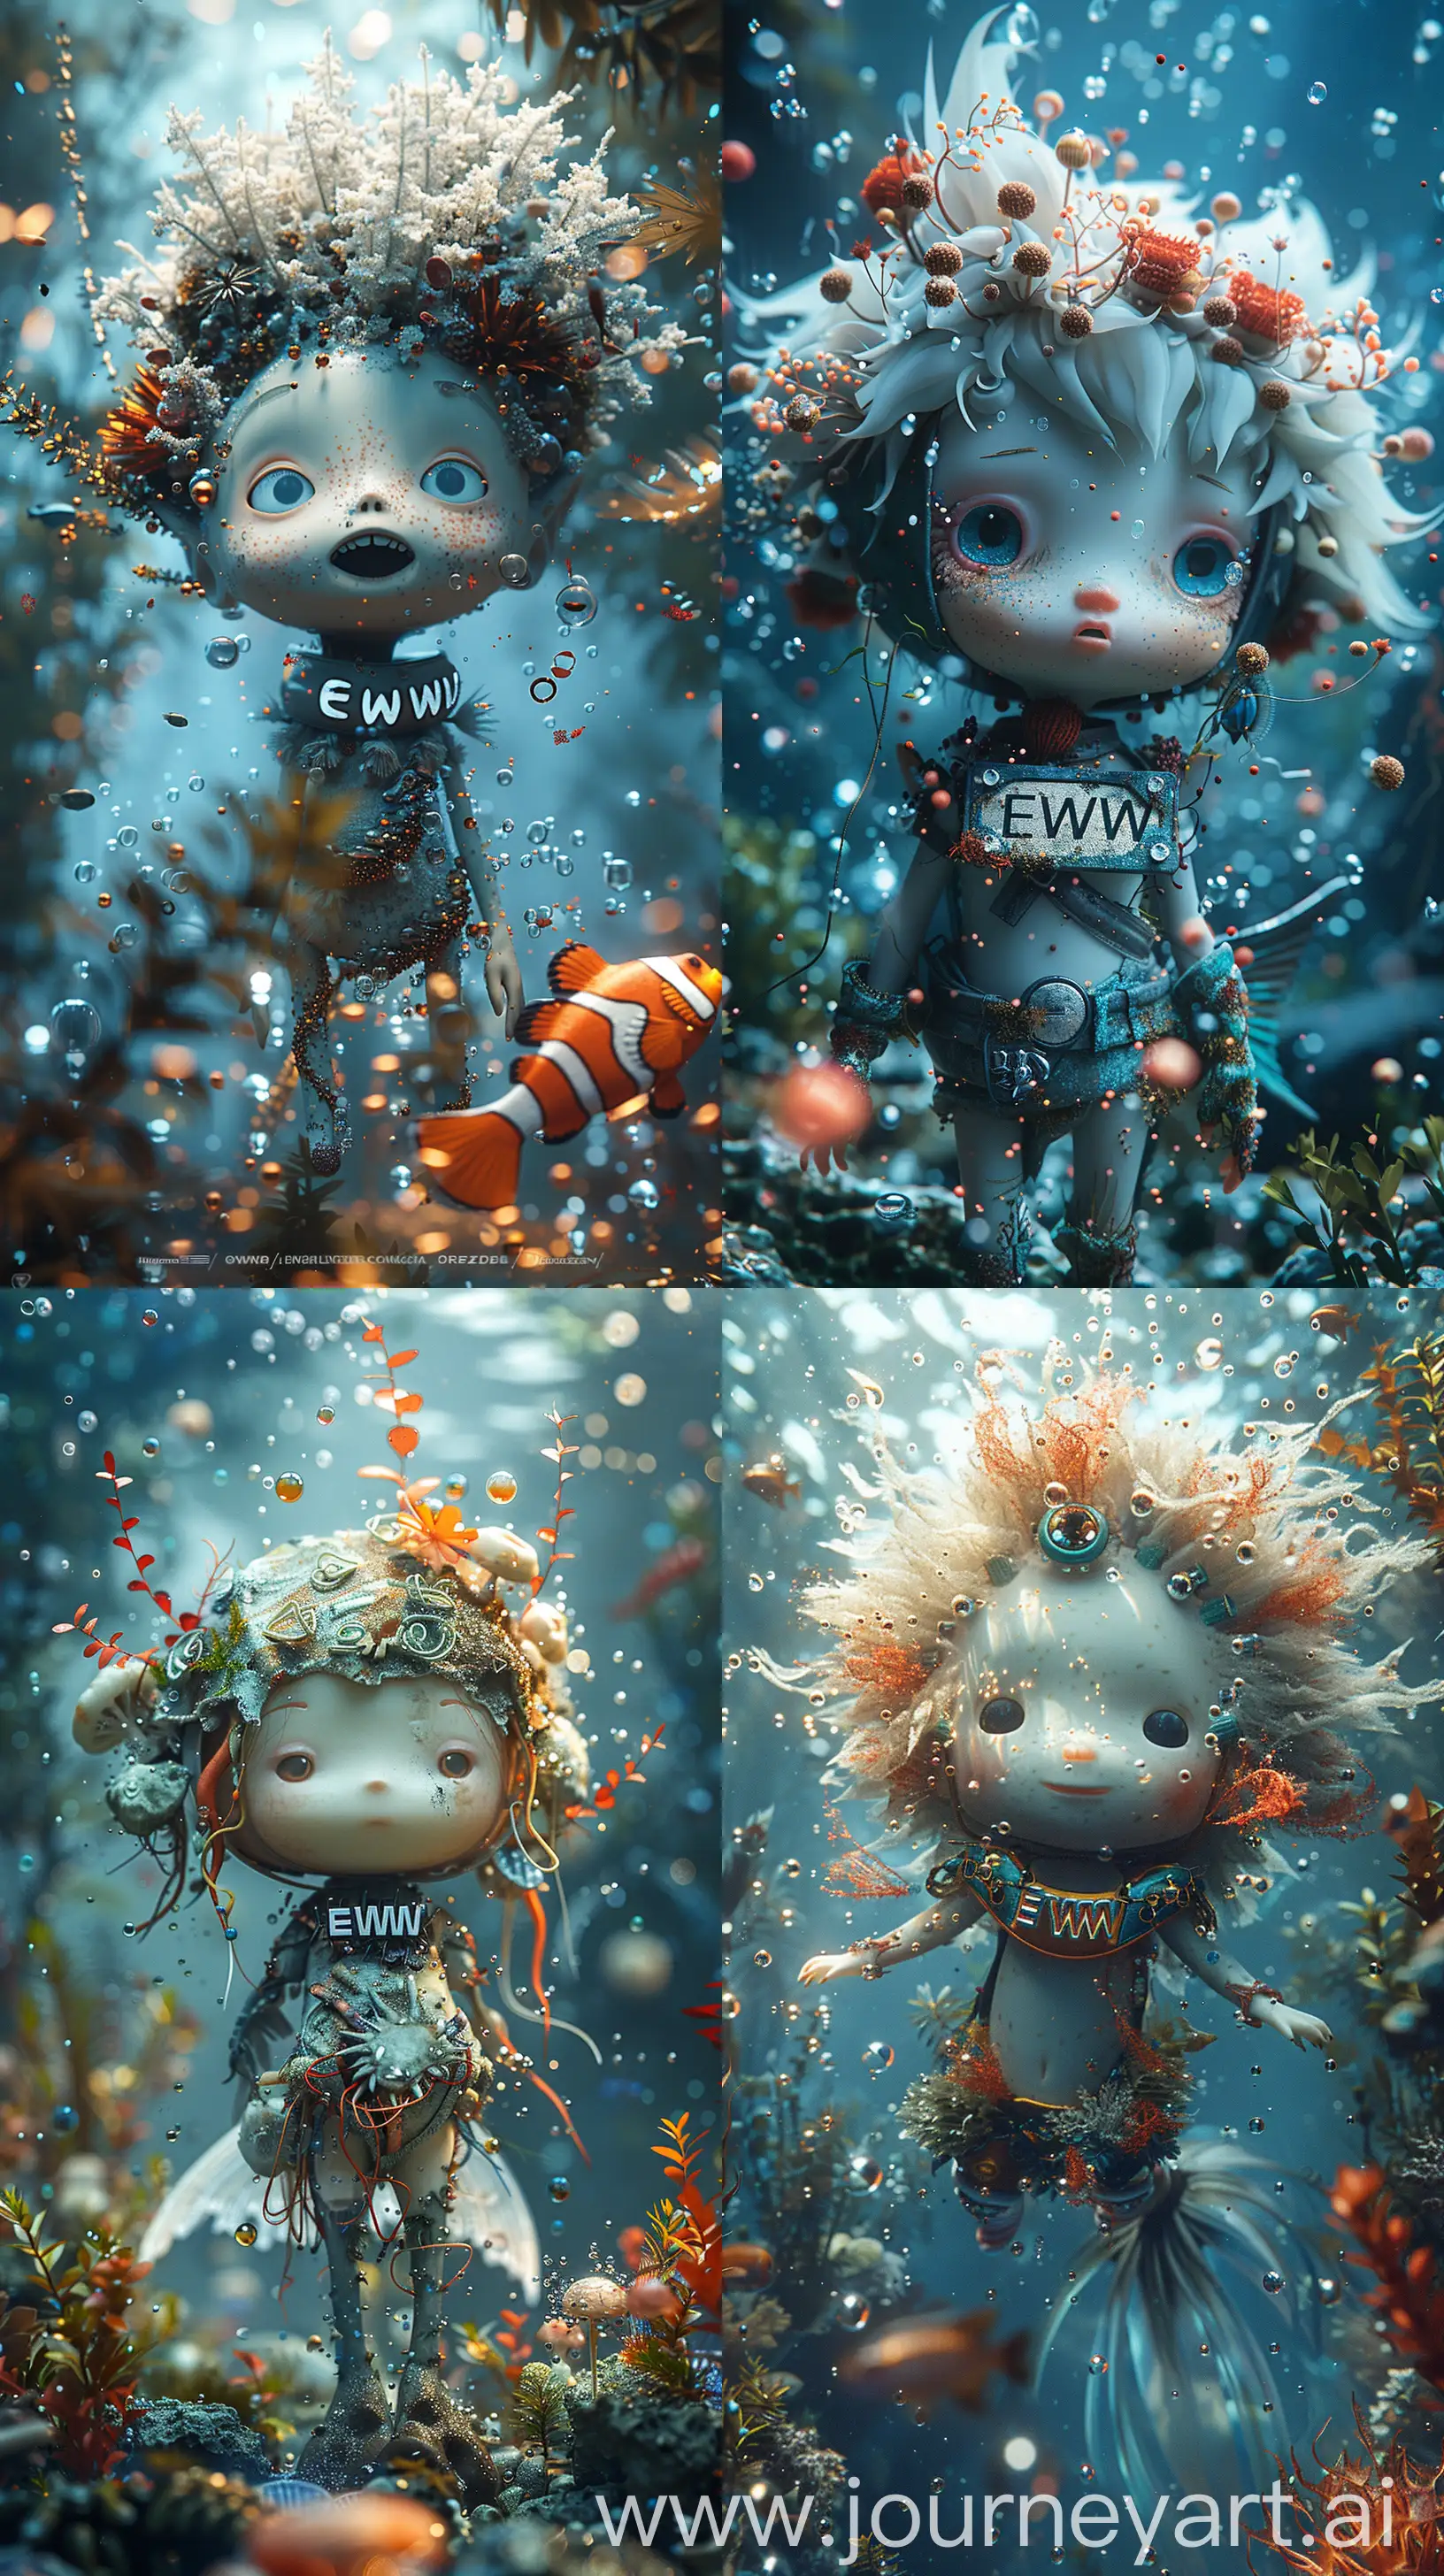 Cute-Underwater-Fantasy-Character-with-EWW-Collar-and-Surreal-Headpiece